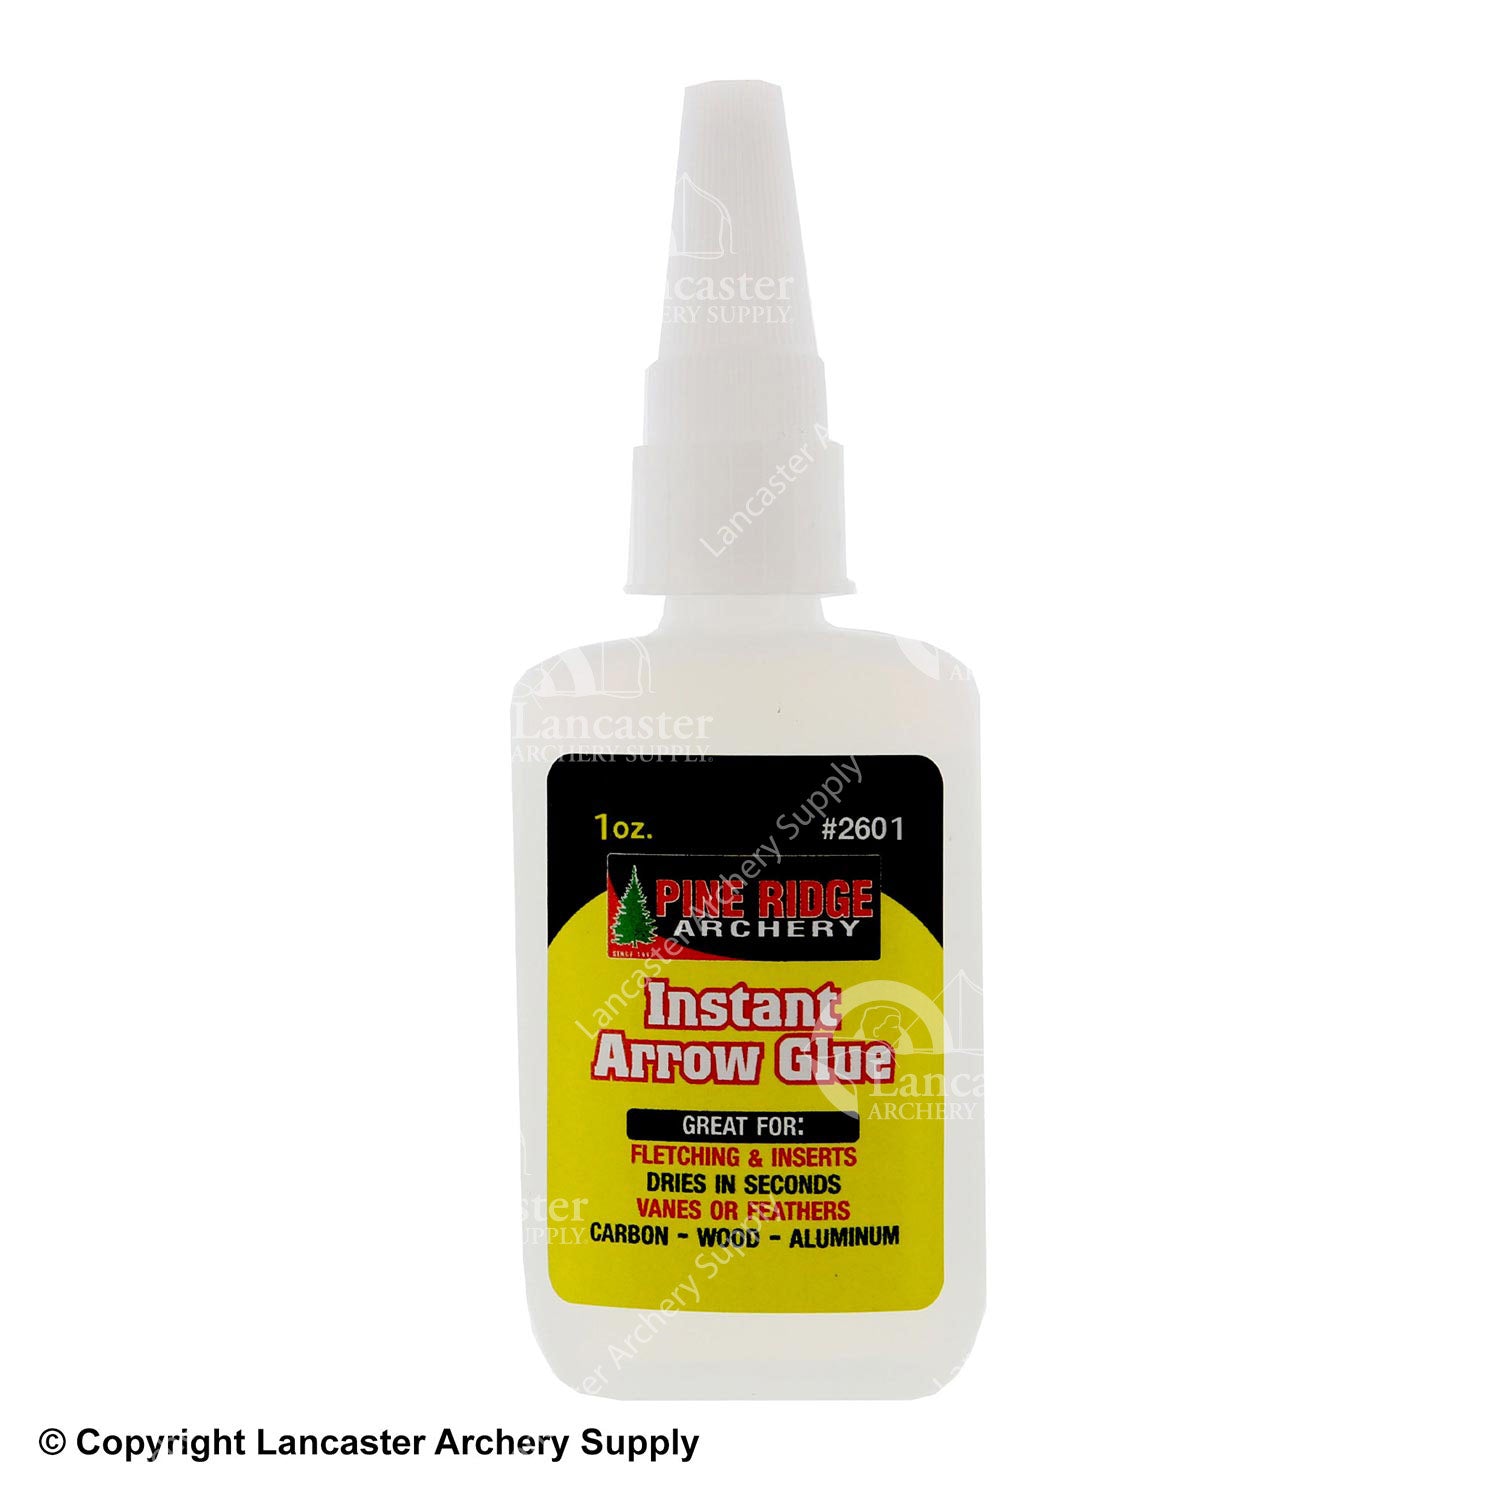 Pine Ridge Archery Instant Arrow Glue, The Best Fletching Adhesive for  Fletching Vanes, Feathers and Inserts, Perfect for Aluminium, Carbon and  Wood